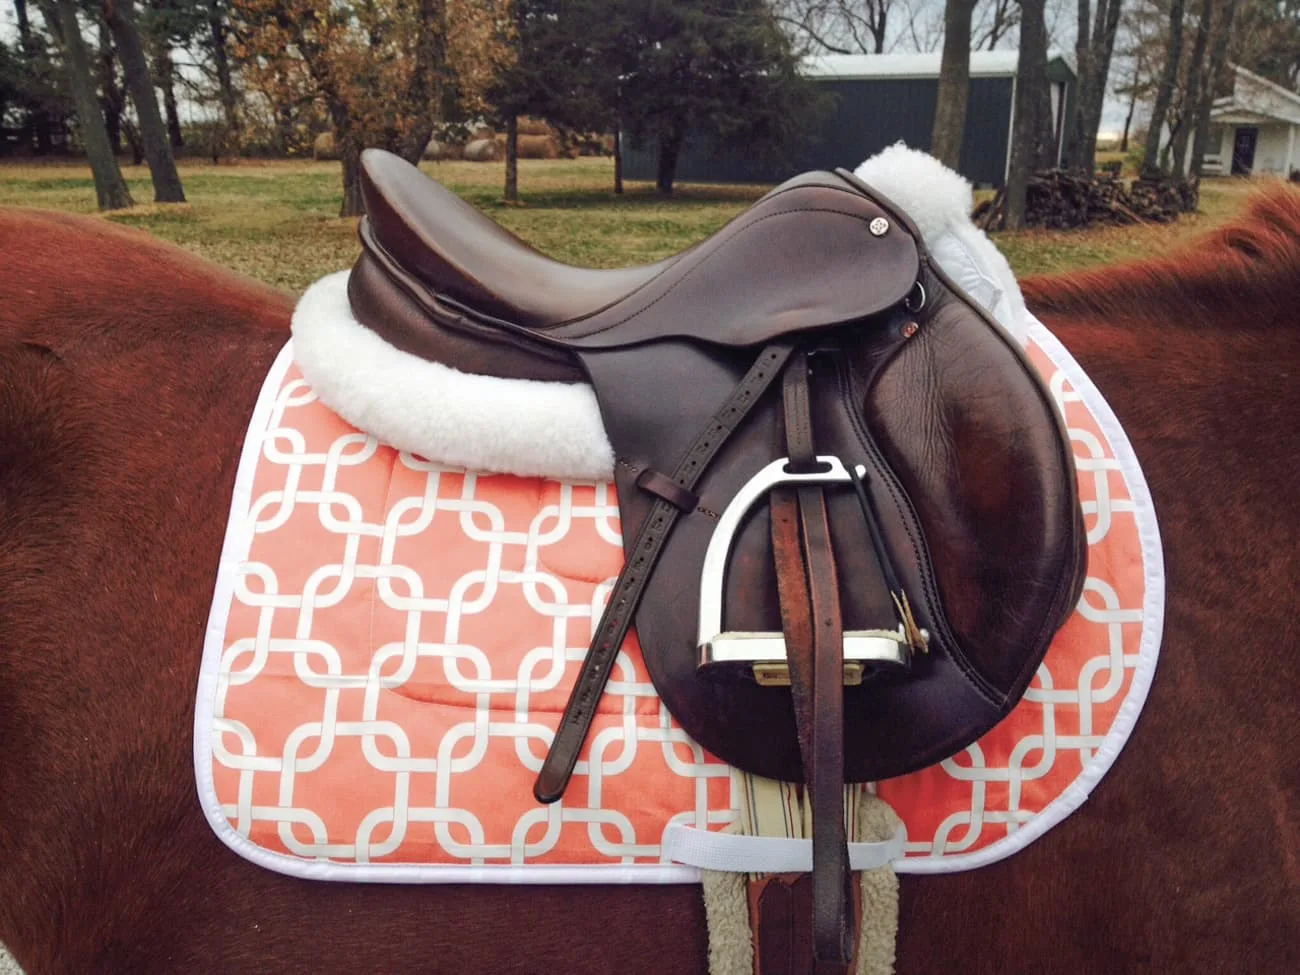 Learn about the parts of an english horseback riding saddle.